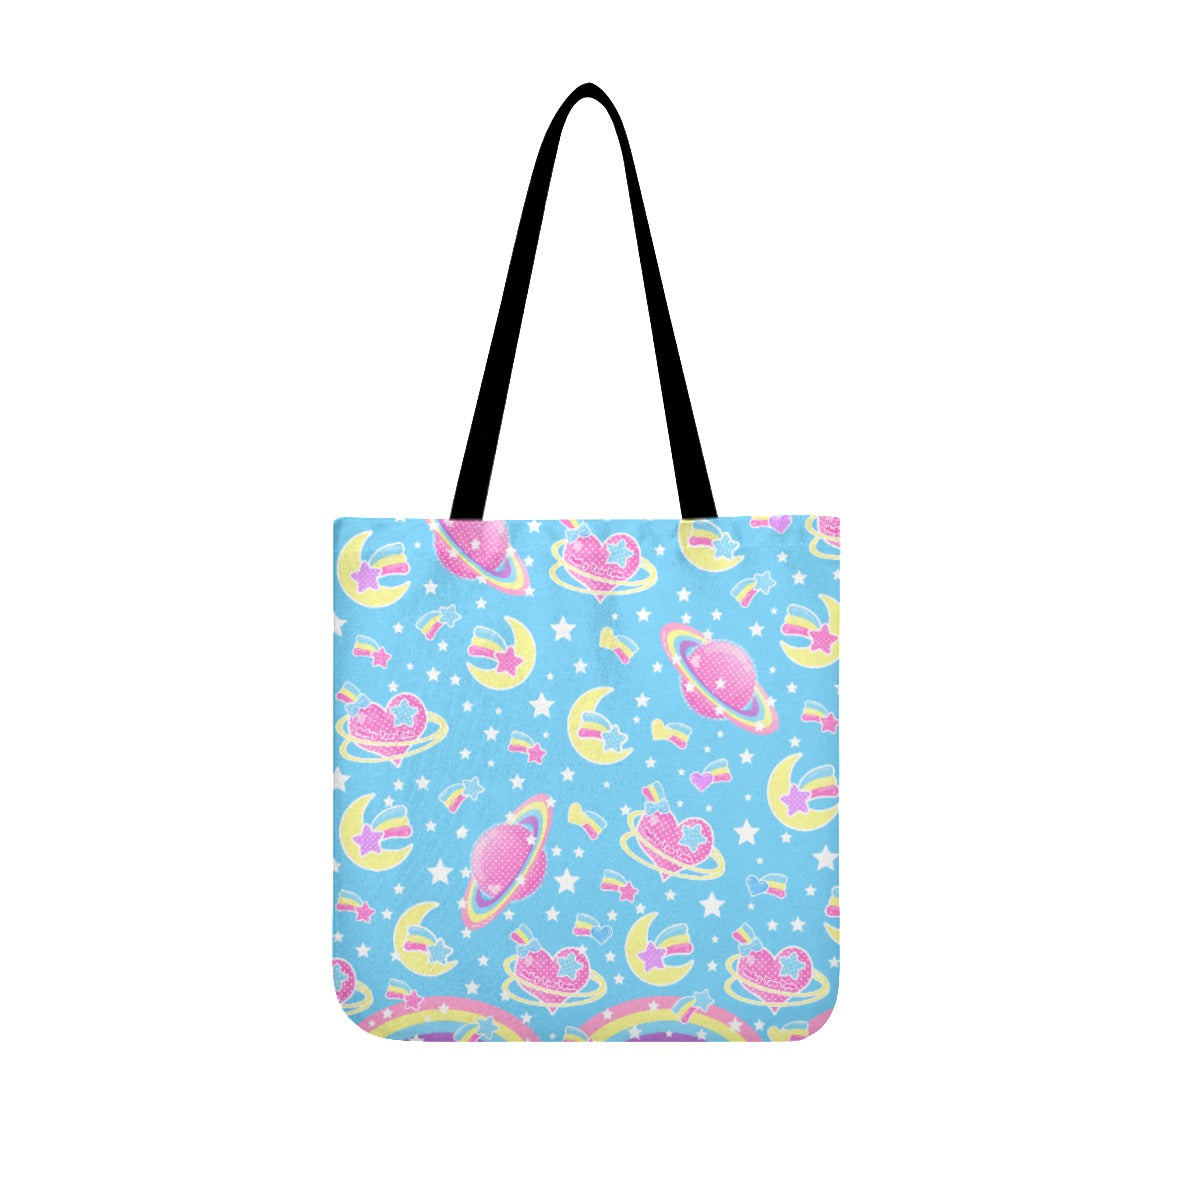 Saturn's Wish Blue Canvas Tote Bag